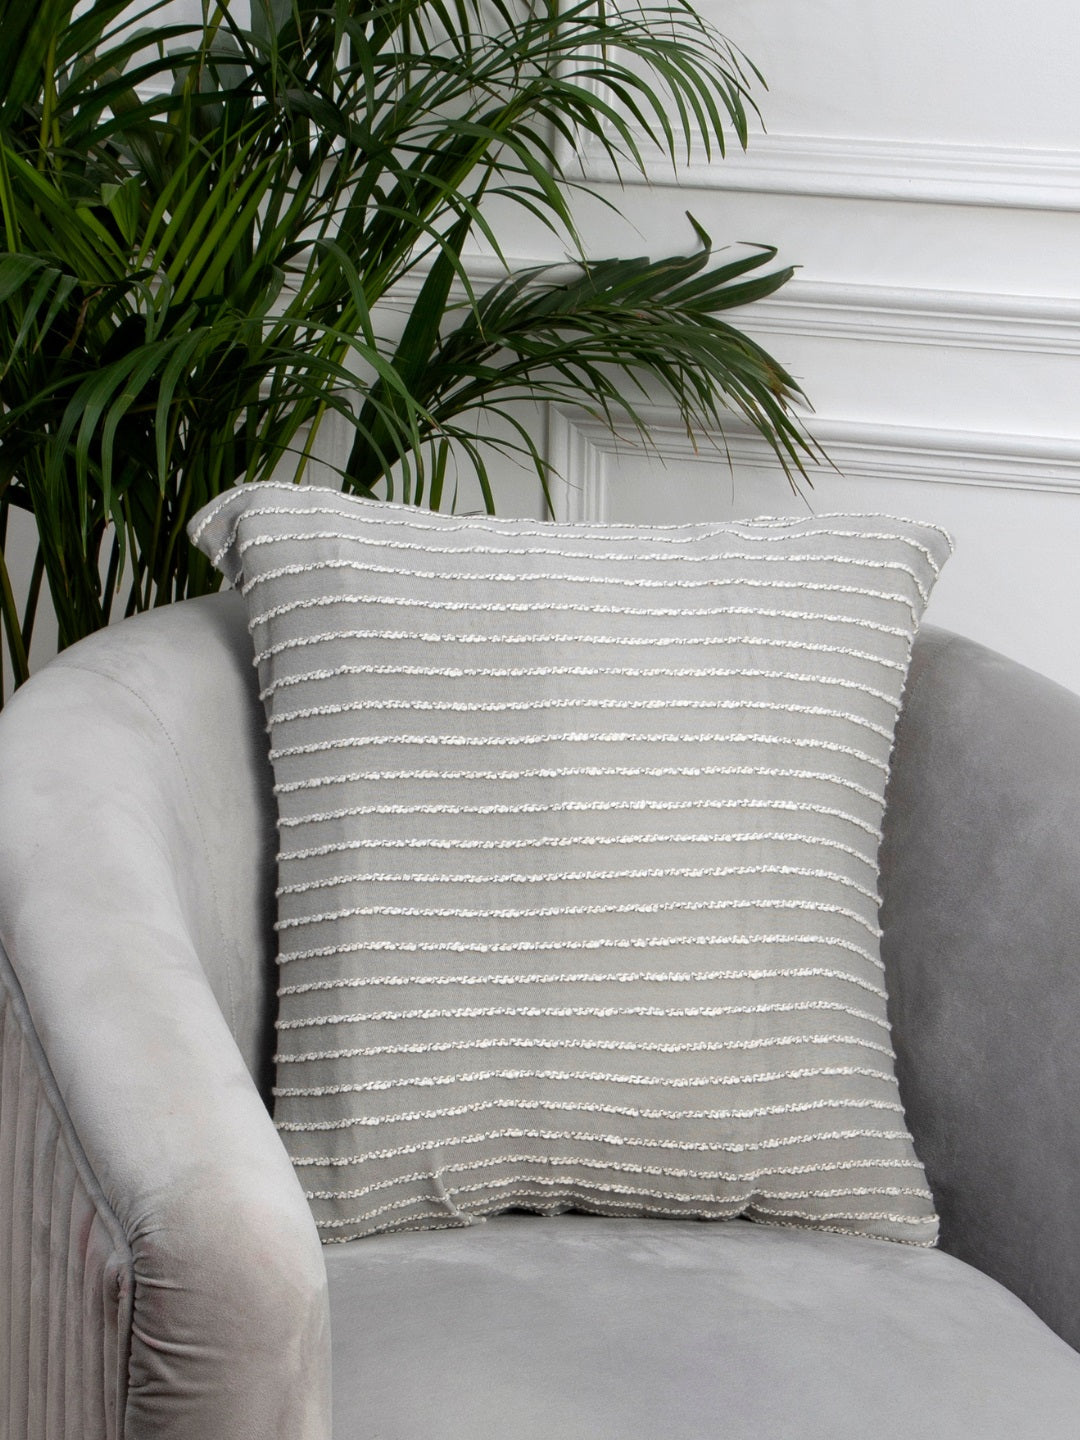 Grey cotton knit cushion cover